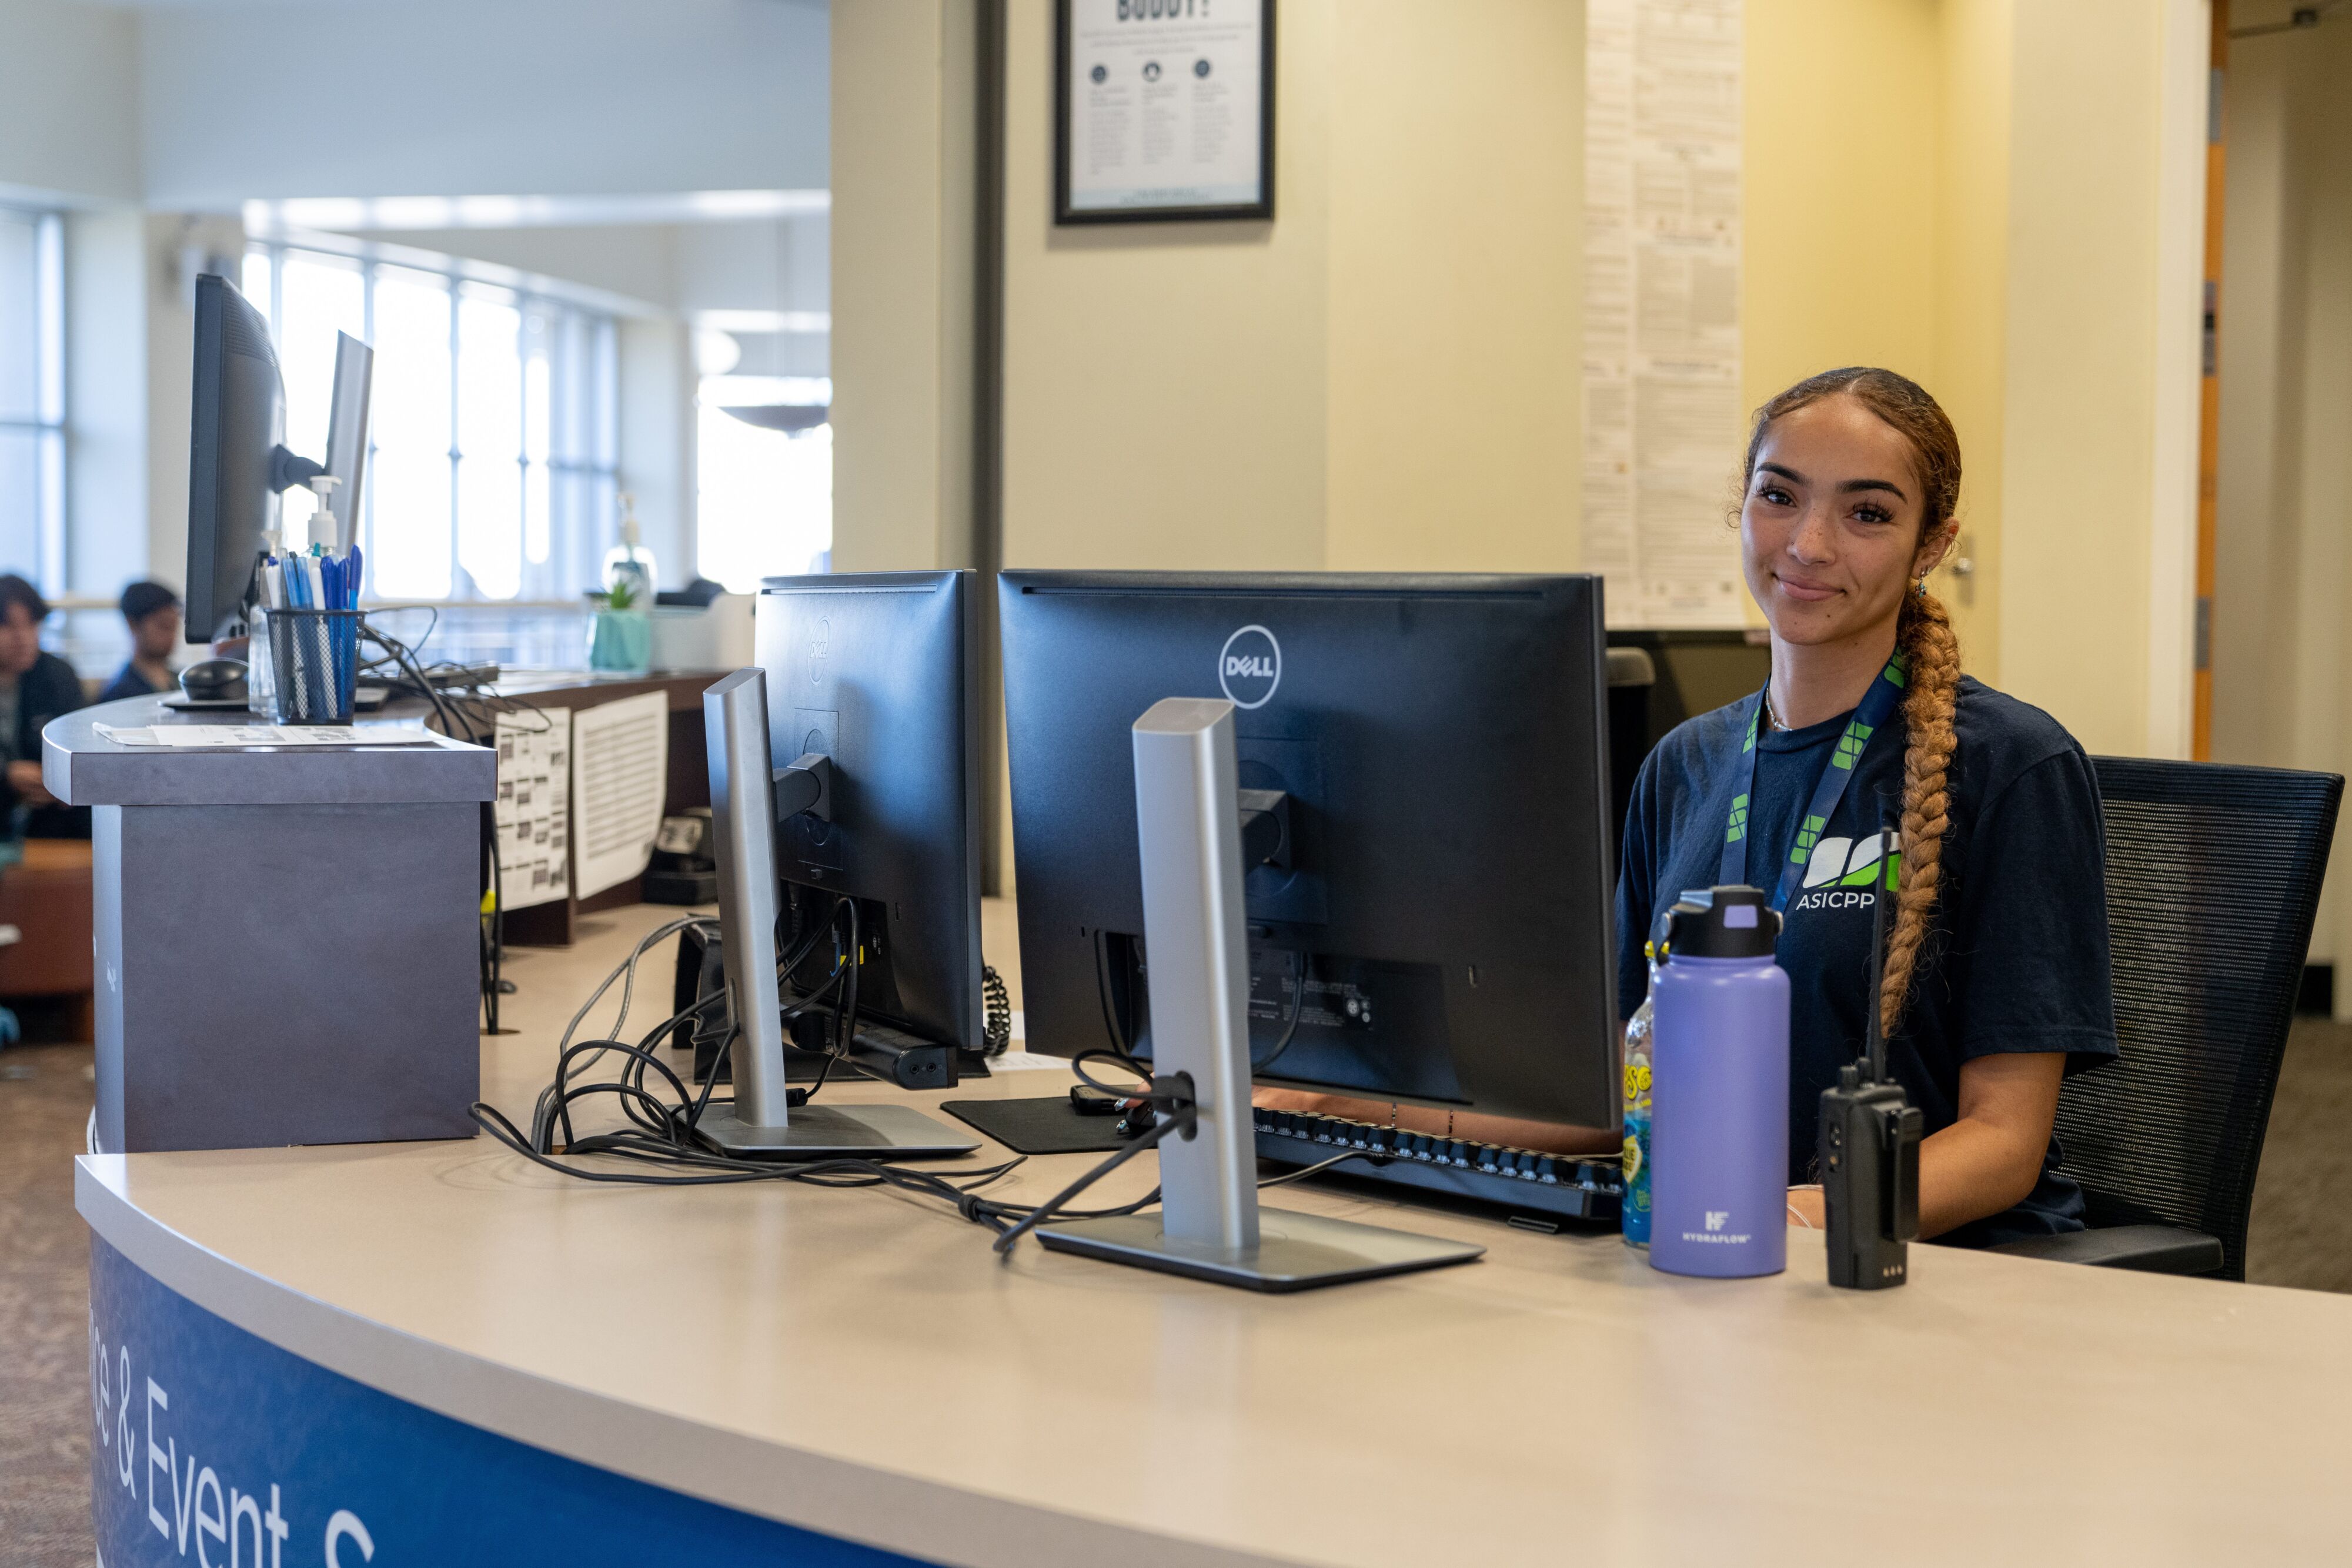 student employee at the C&E computer desk